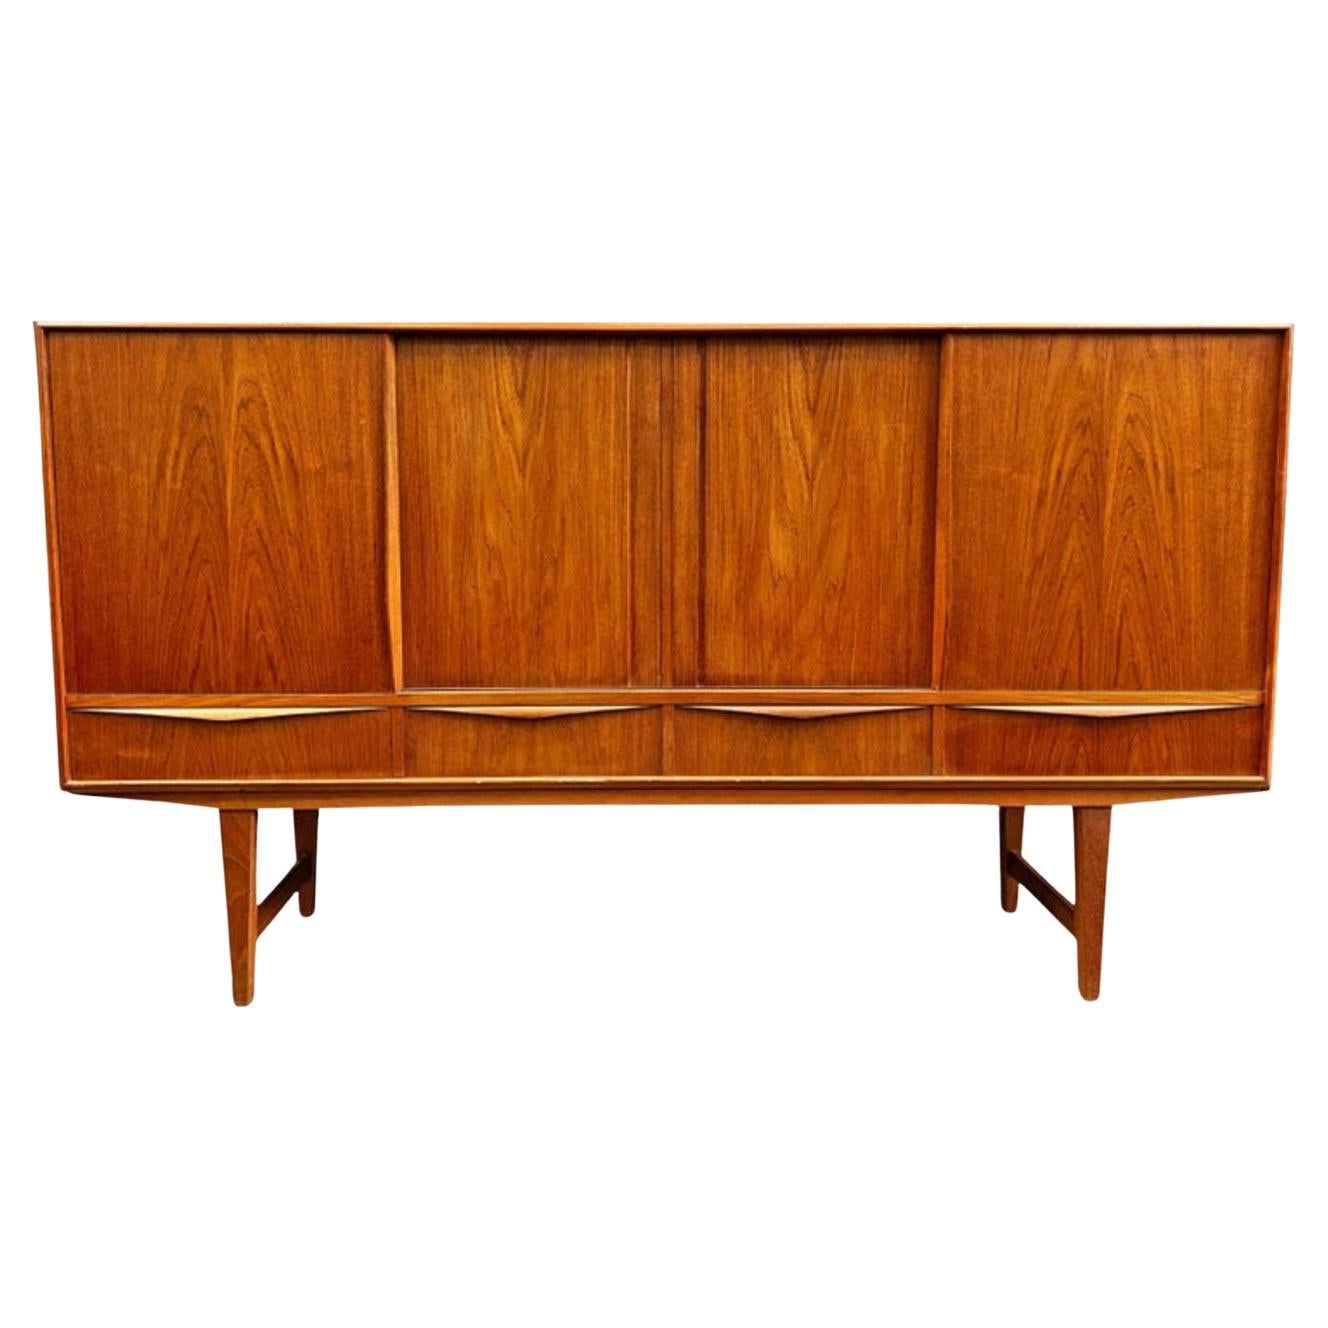 Tall Teak Danish Modern Credenza by E.W. Bach with Bar For Sale